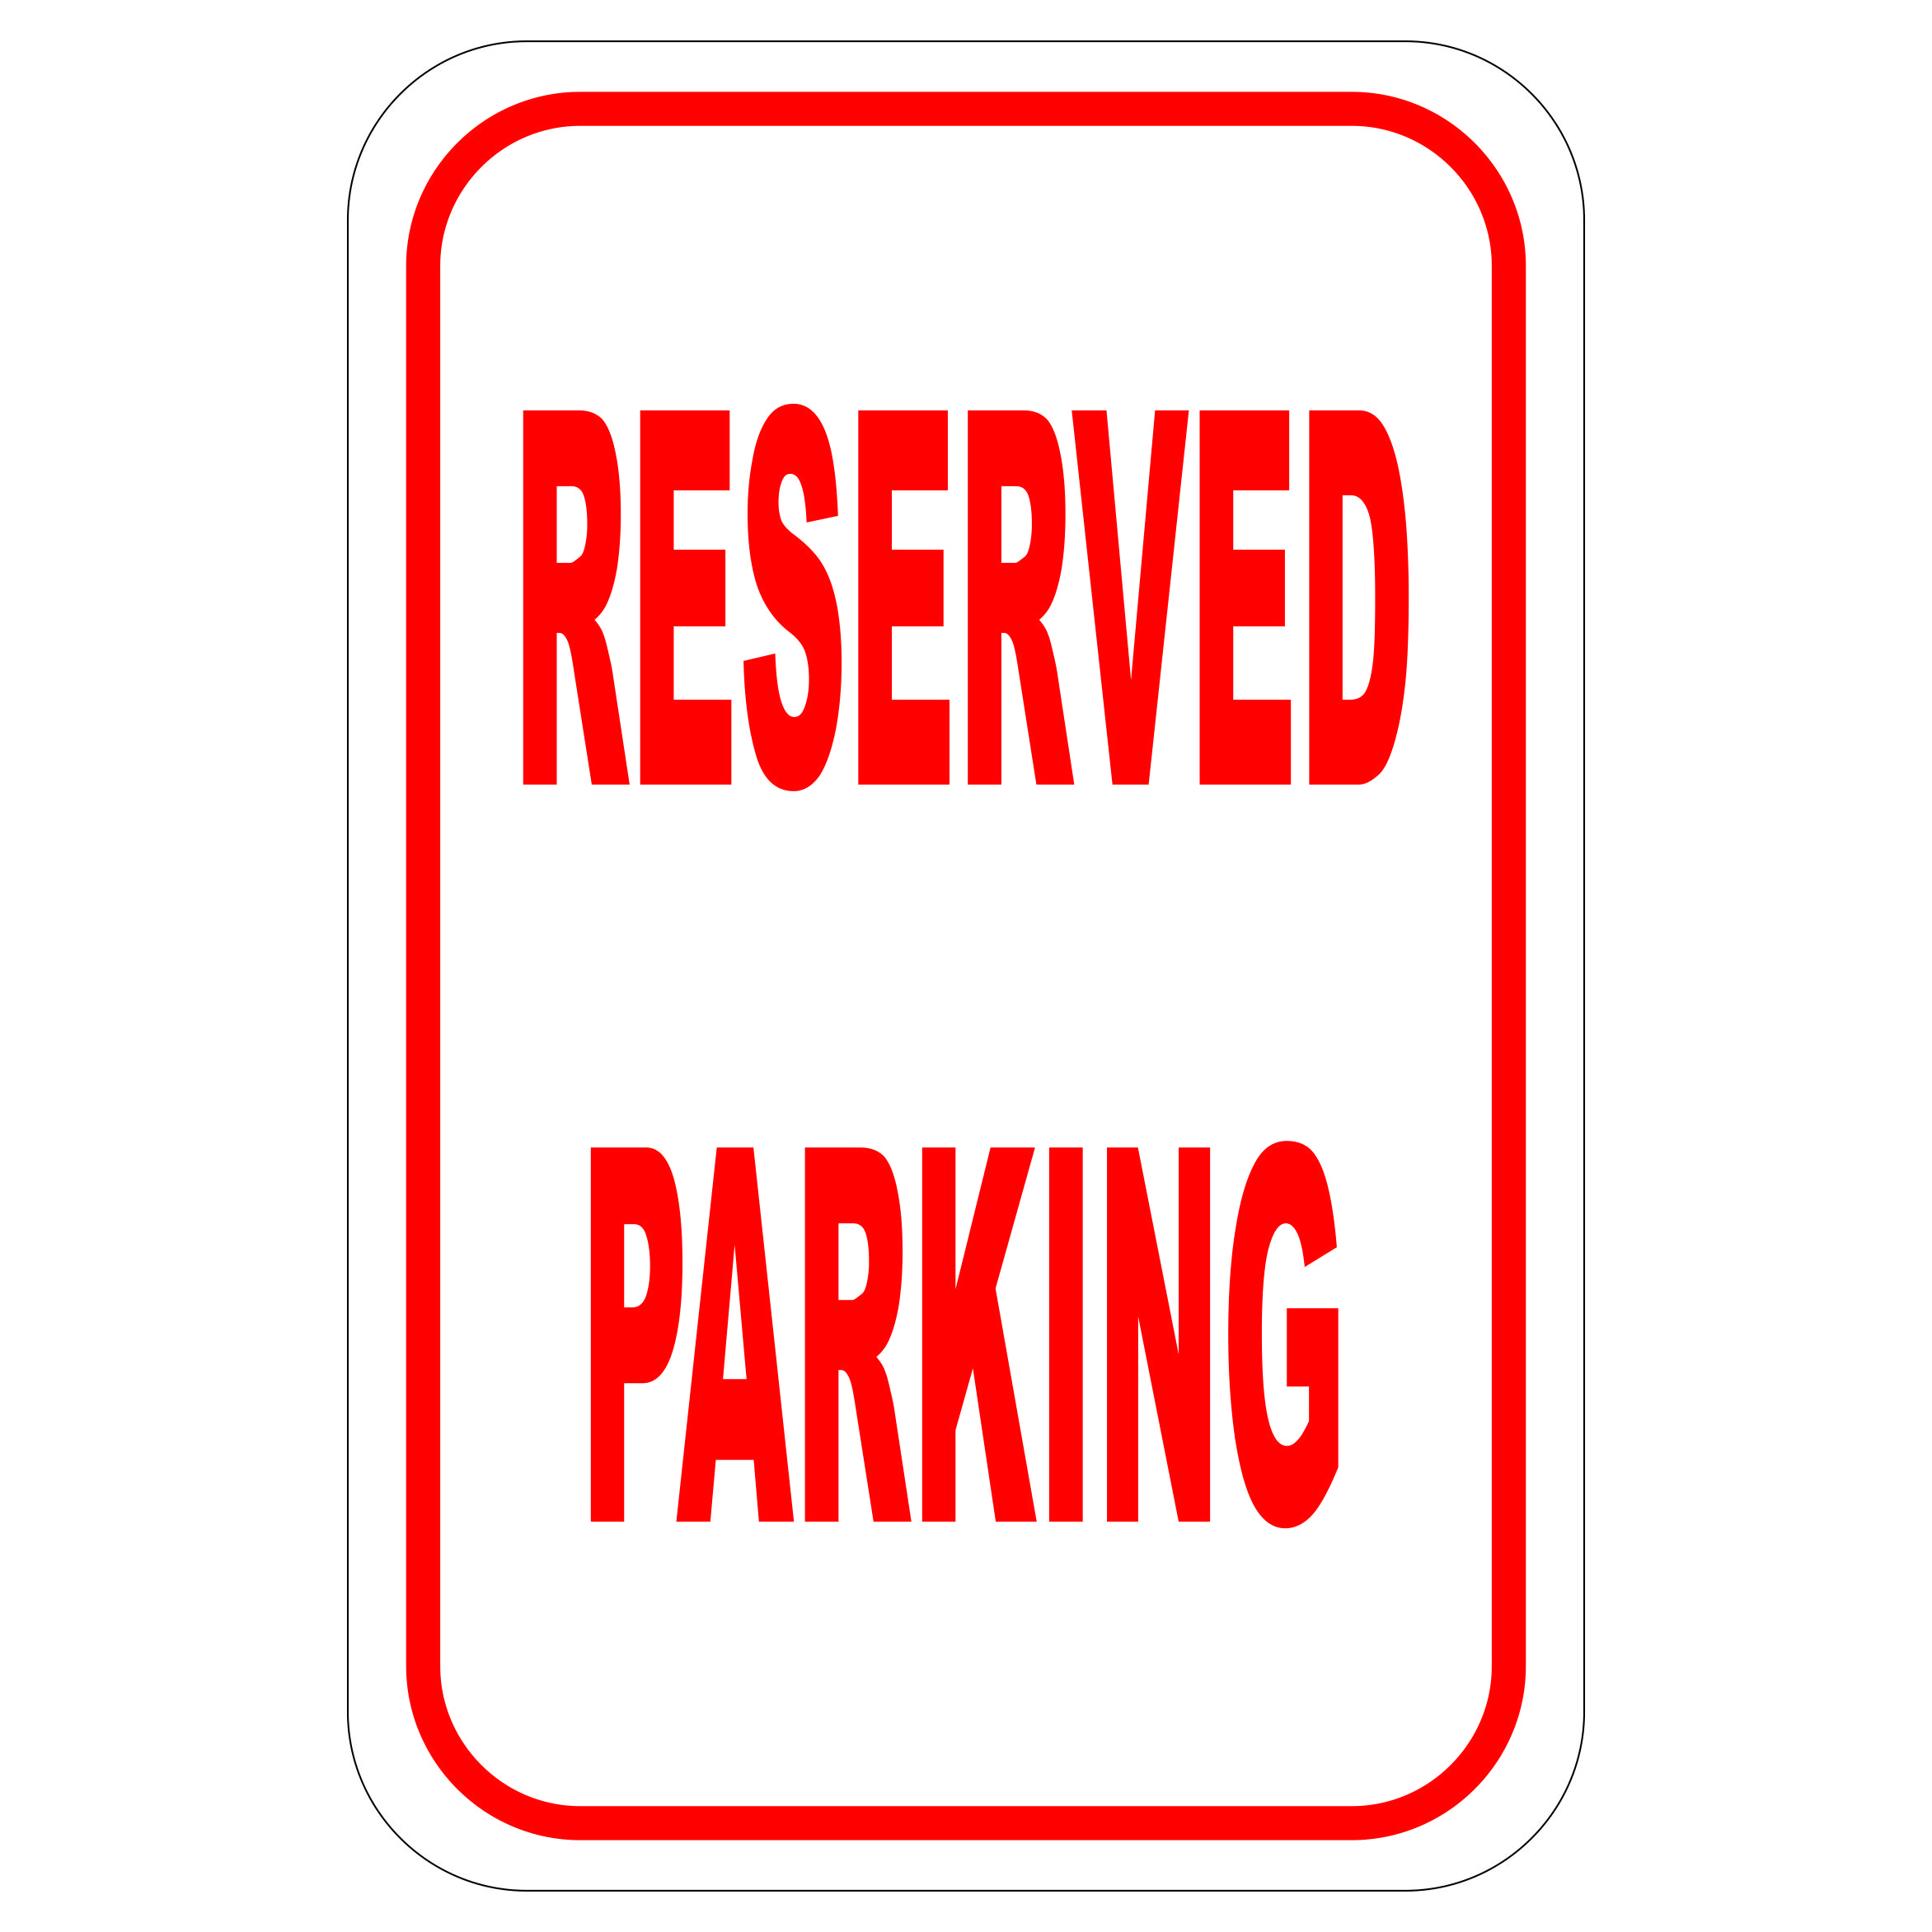 reserved parking space images